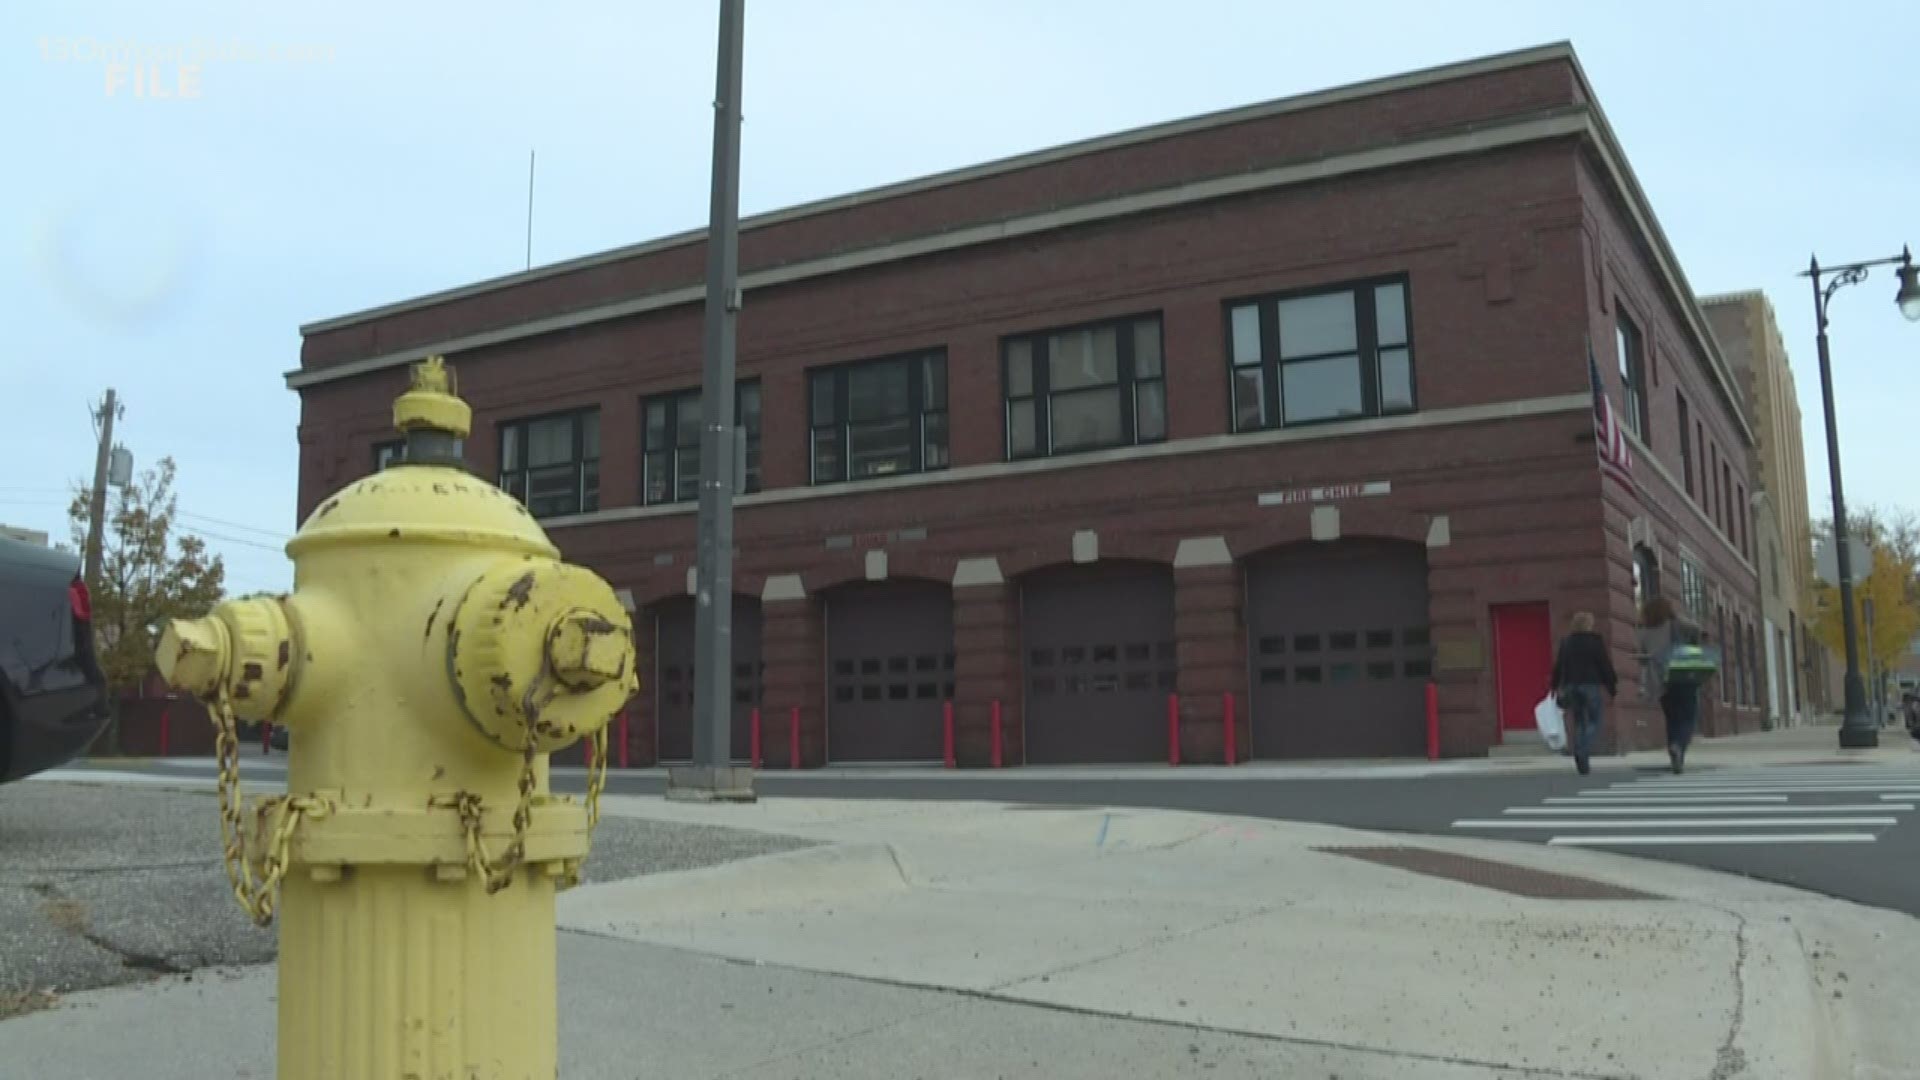 The Grand Rapids Fire Department has received for more than $200,000 in grant money to install smoke and carbon monoxide detectors in local homes.